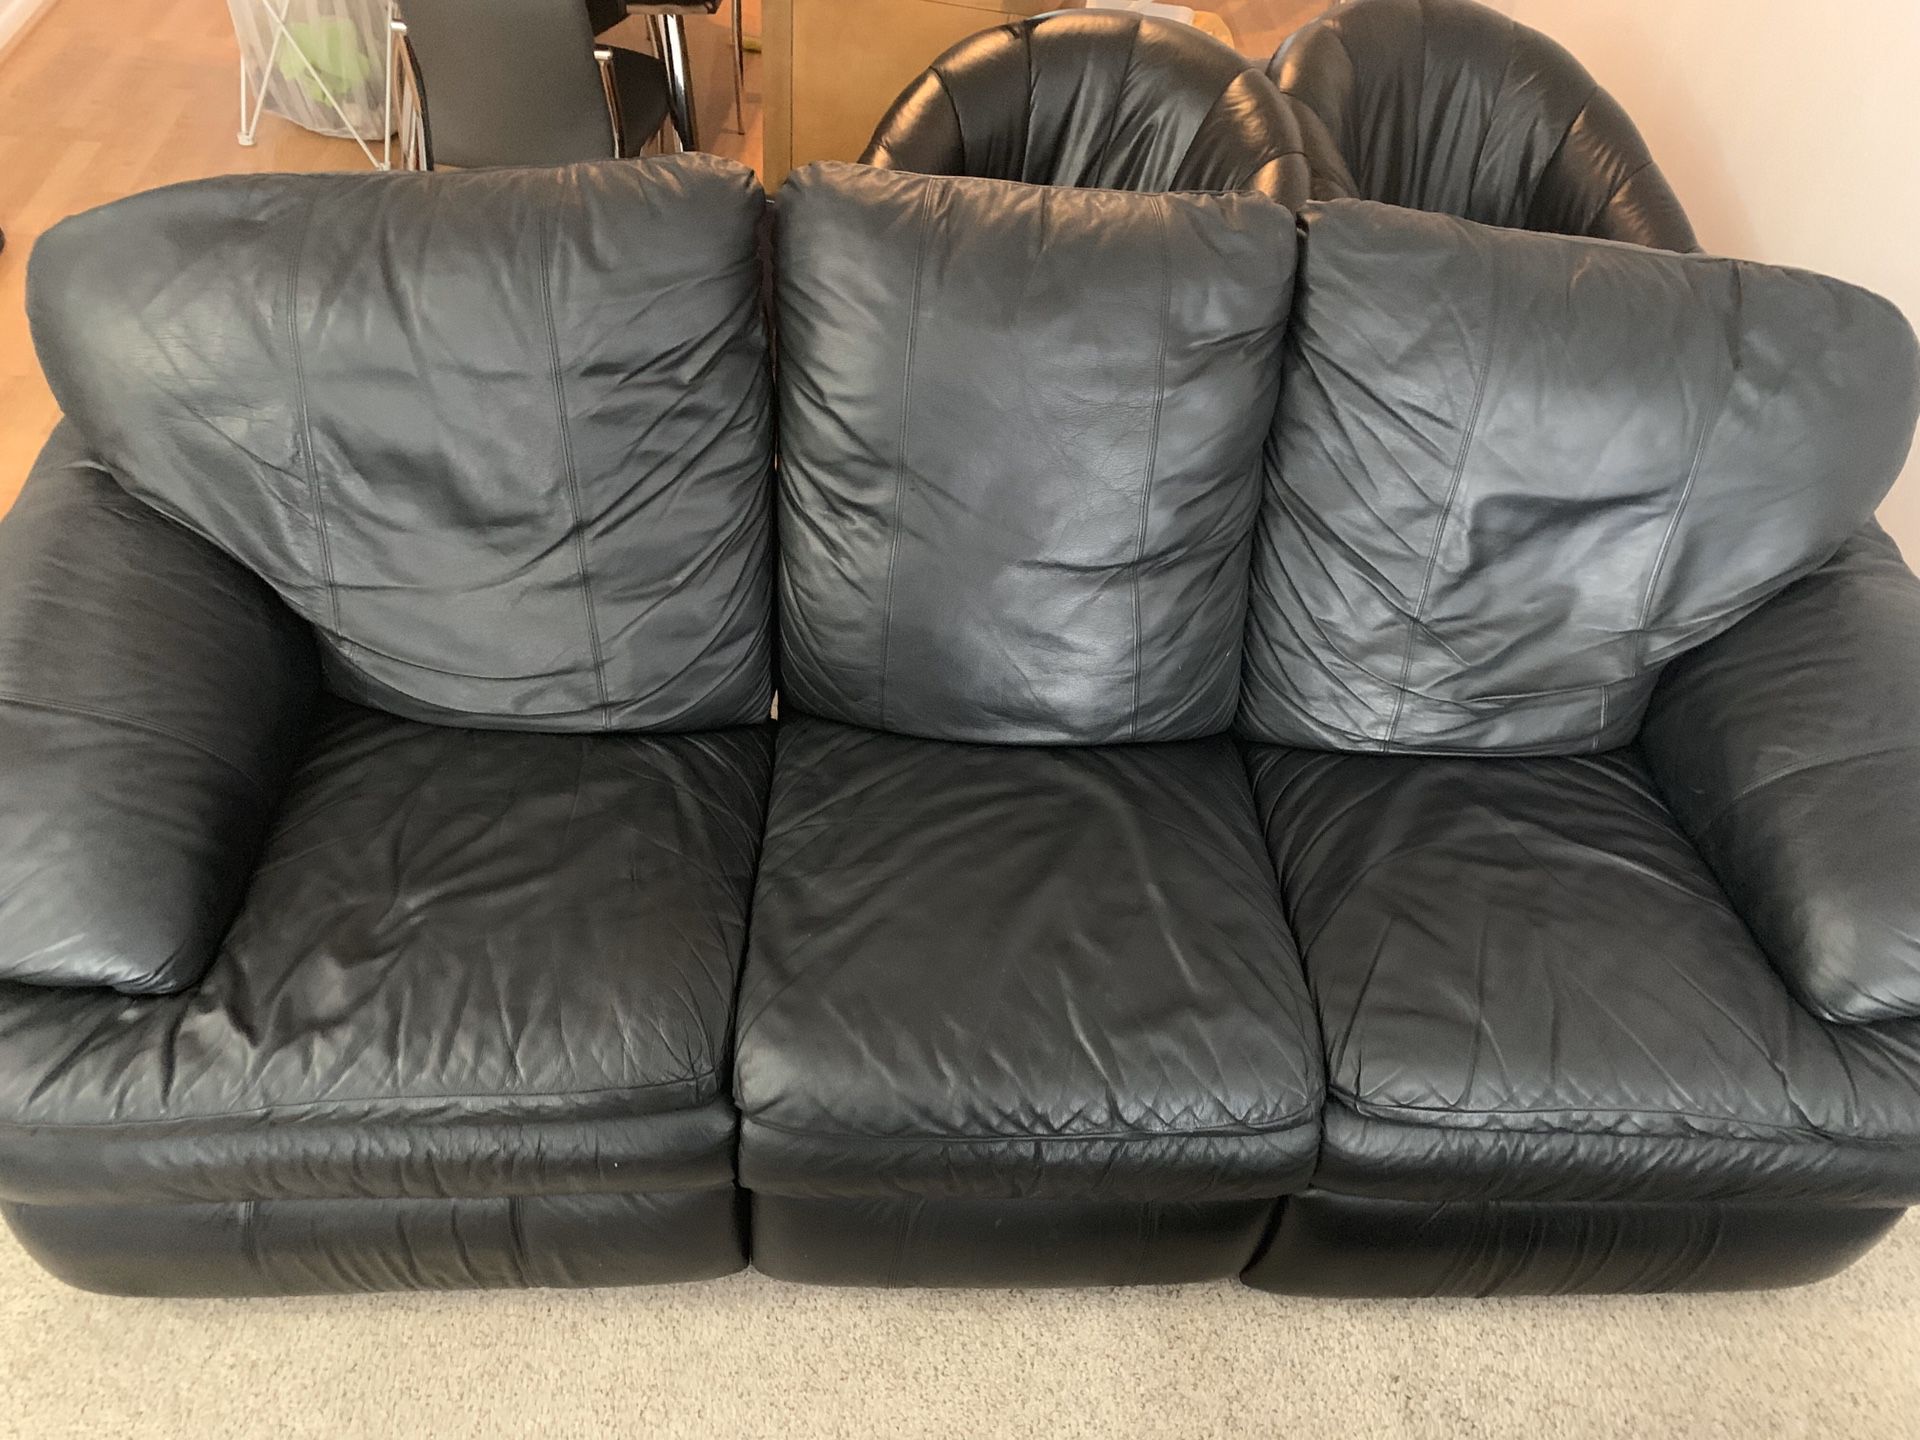 Reclining leather couch - Need it gone TODAY